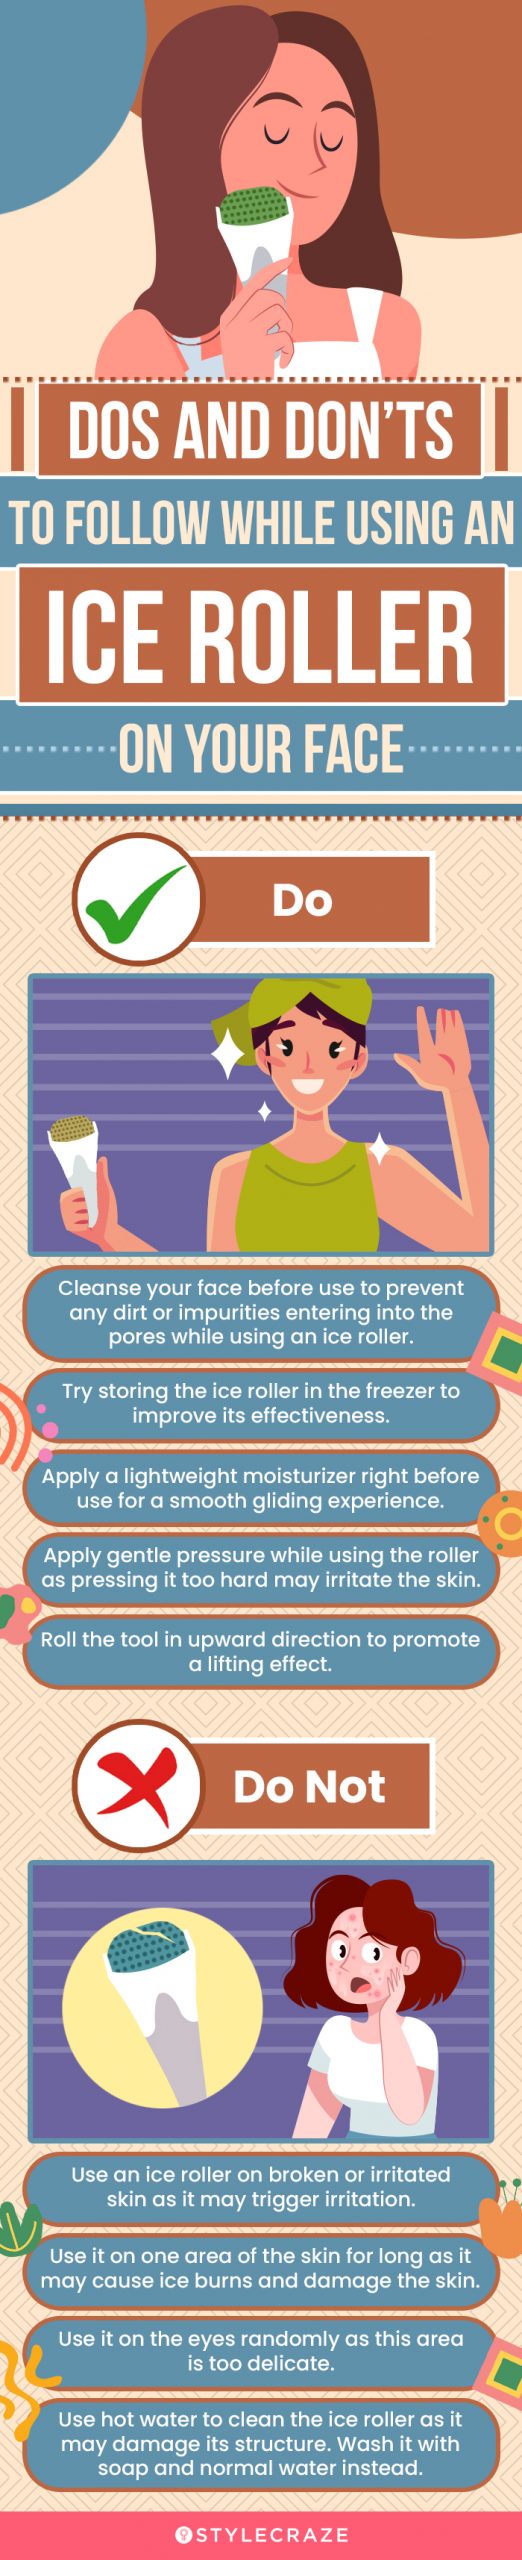 Dos And Don’ts To Follow While Using An Ice Roller On Your Face (infographic)